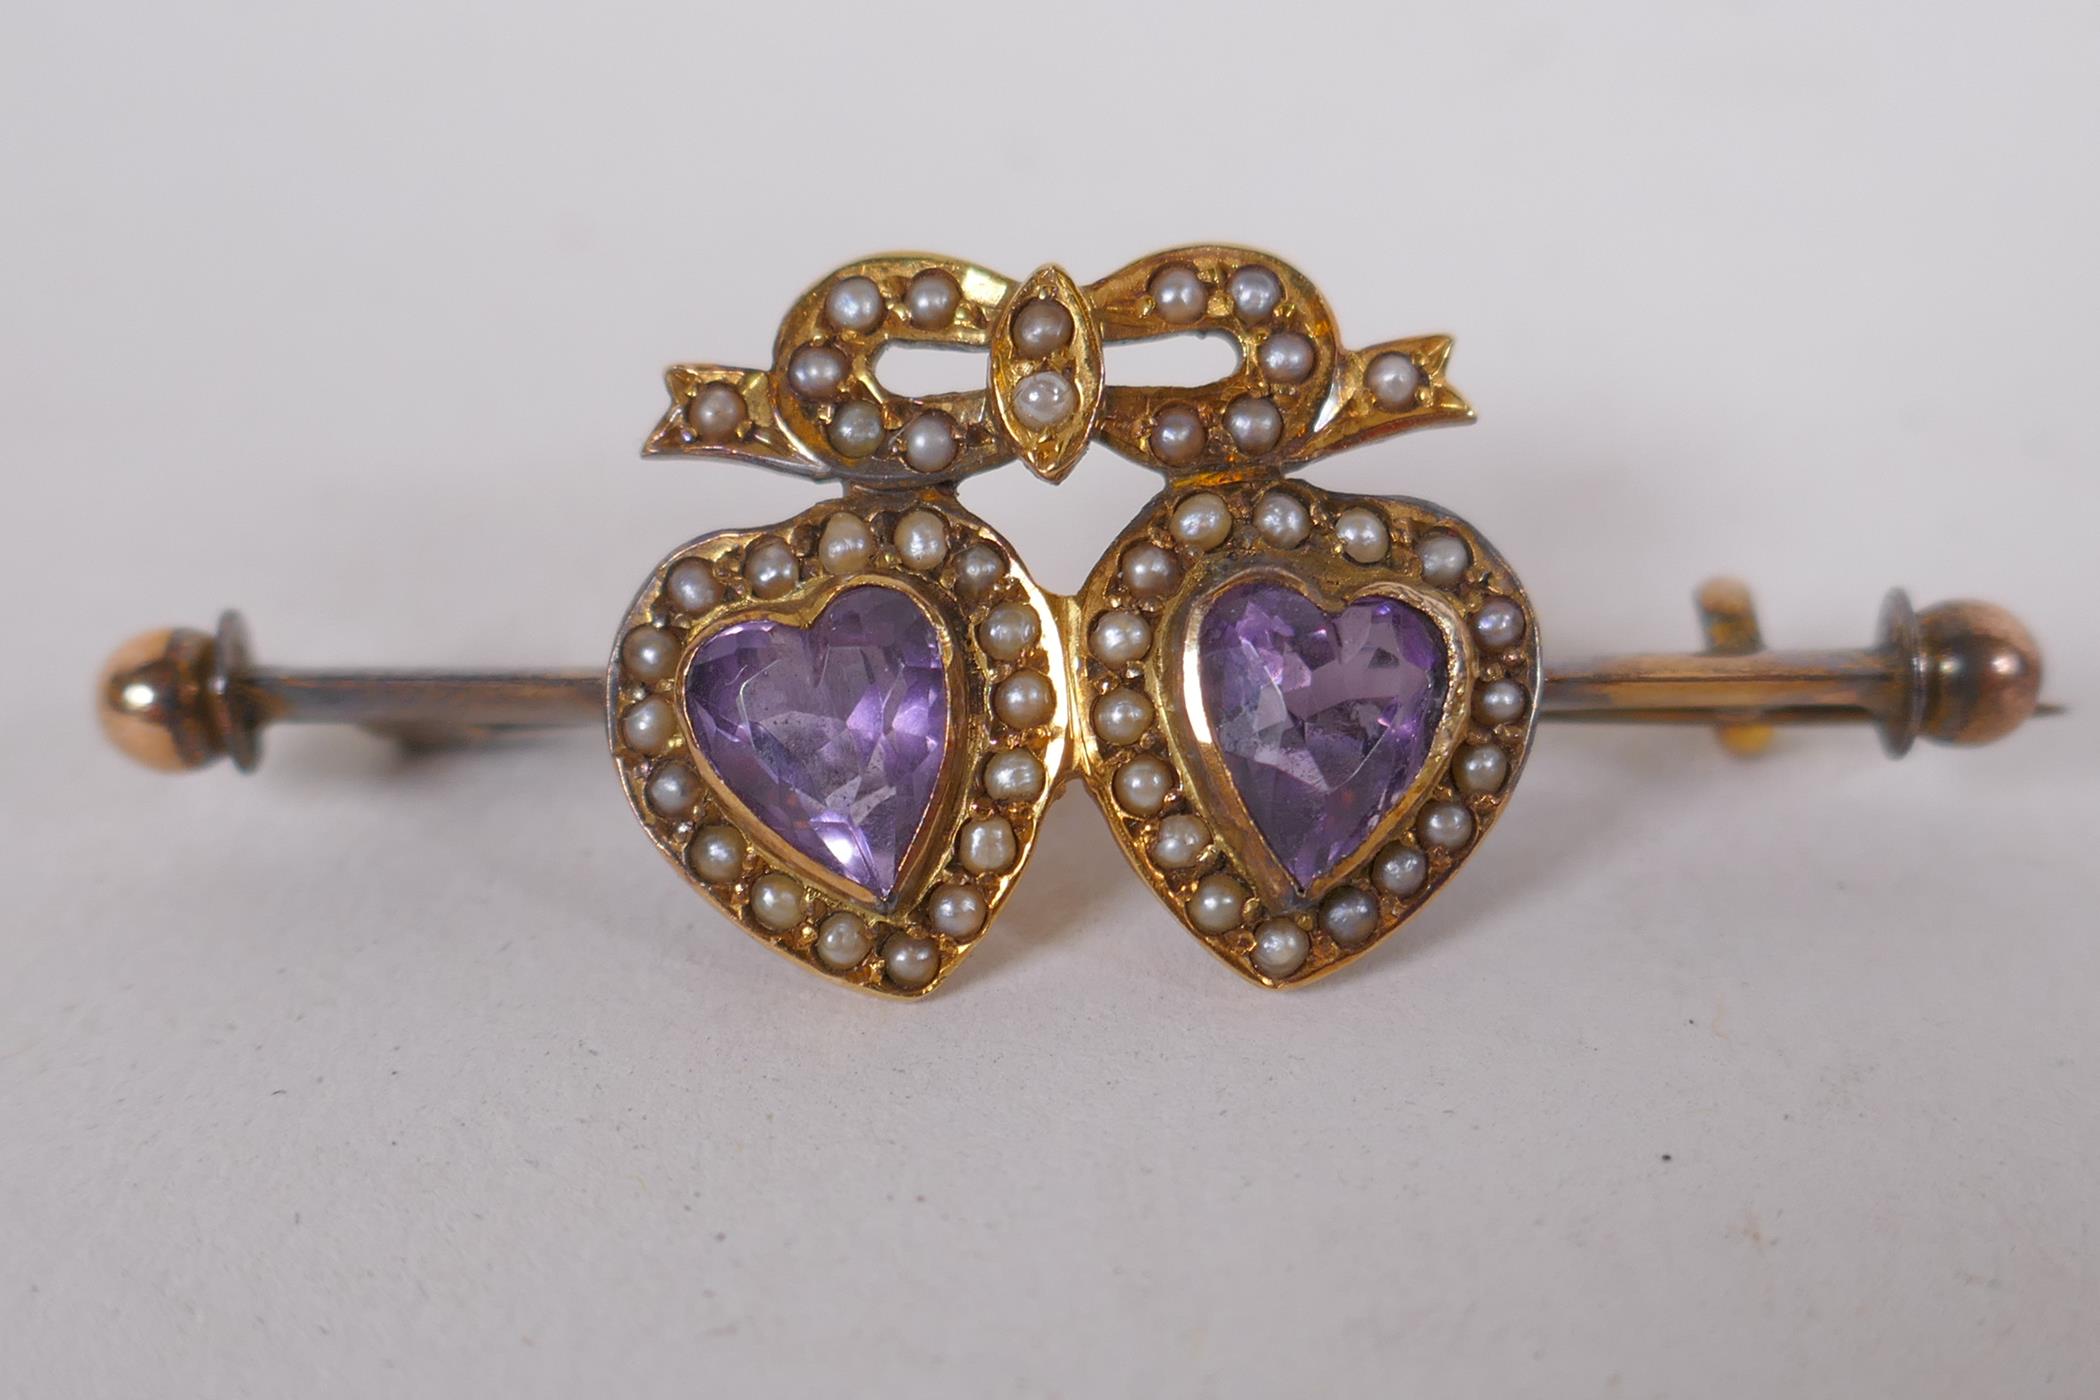 A 9ct gold brooch set with two heart shaped amethysts and seed pearls, 4.2cm long, 3.8g